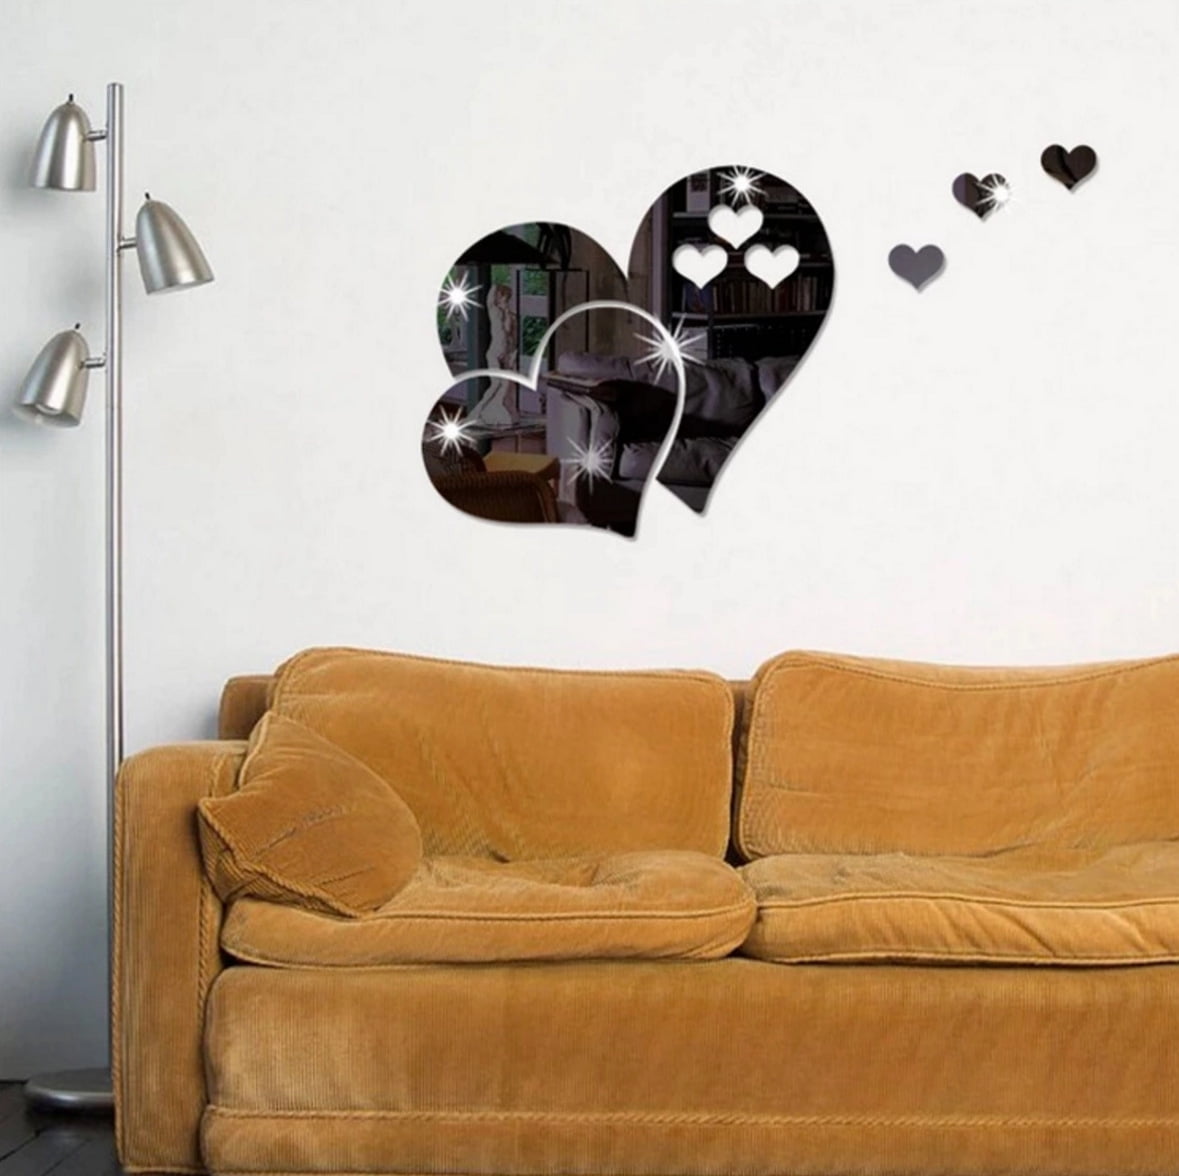 Romantic 3D Wall Sticker Mirror Love Hearts Decal DIY Room Art Mural Removable